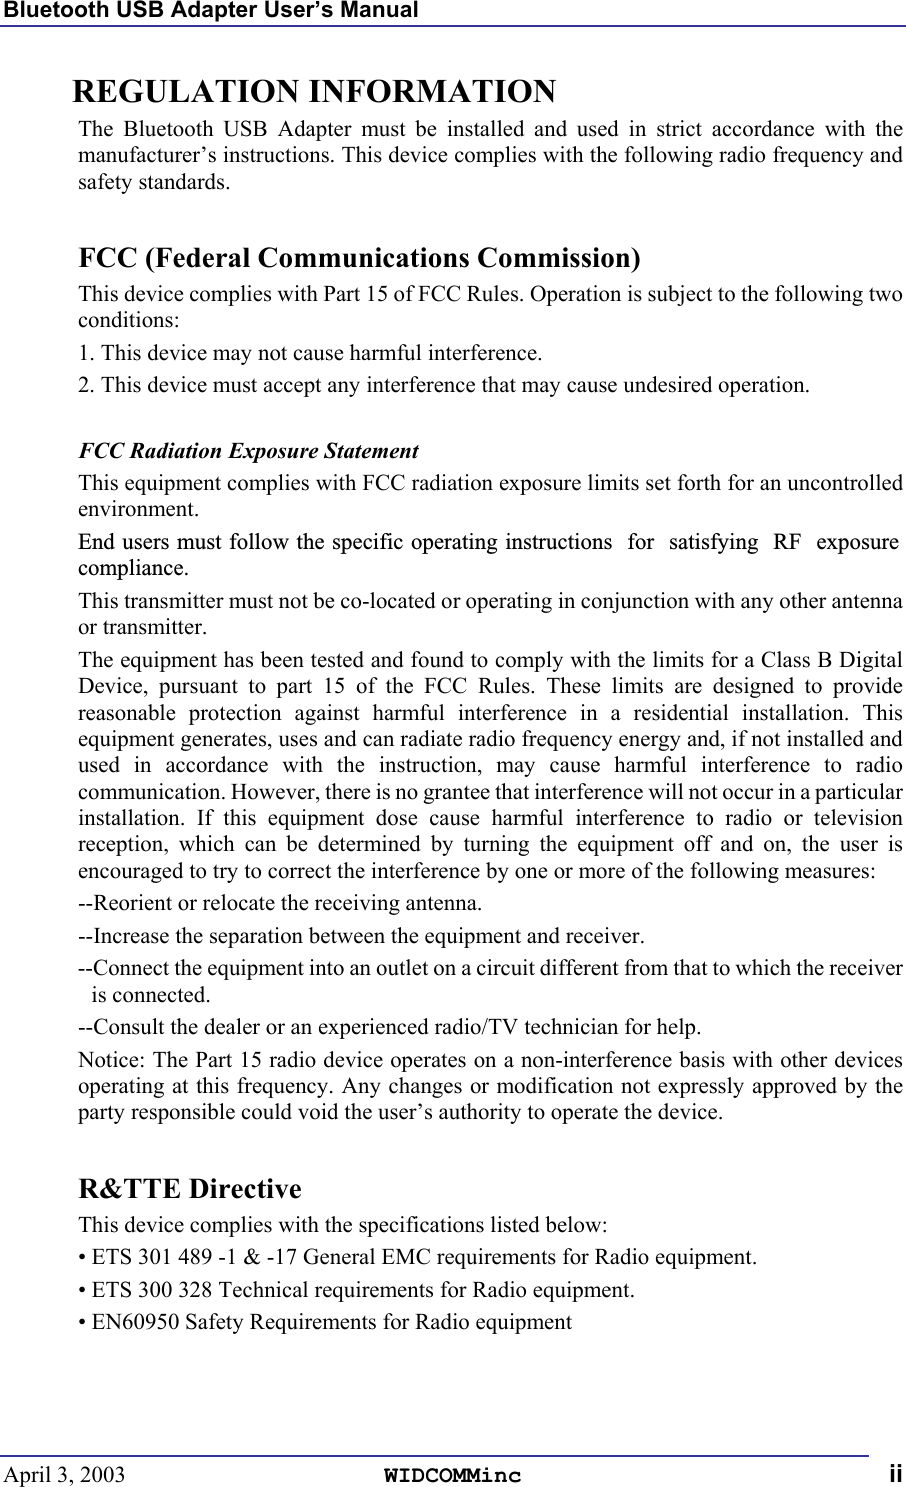 Bluetooth USB Adapter User’s Manual April 3, 2003  WIDCOMMinc ii REGULATION INFORMATION The Bluetooth USB Adapter must be installed and used in strict accordance with the manufacturer’s instructions. This device complies with the following radio frequency and safety standards.  FCC (Federal Communications Commission) This device complies with Part 15 of FCC Rules. Operation is subject to the following two conditions: 1. This device may not cause harmful interference. 2. This device must accept any interference that may cause undesired operation.  FCC Radiation Exposure Statement This equipment complies with FCC radiation exposure limits set forth for an uncontrolled environment. End users must follow the specific operating instructions  for  satisfying  RF  exposure compliance. This transmitter must not be co-located or operating in conjunction with any other antenna or transmitter. The equipment has been tested and found to comply with the limits for a Class B Digital Device, pursuant to part 15 of the FCC Rules. These limits are designed to provide reasonable protection against harmful interference in a residential installation. This equipment generates, uses and can radiate radio frequency energy and, if not installed and used in accordance with the instruction, may cause harmful interference to radio communication. However, there is no grantee that interference will not occur in a particular installation. If this equipment dose cause harmful interference to radio or television reception, which can be determined by turning the equipment off and on, the user is encouraged to try to correct the interference by one or more of the following measures: --Reorient or relocate the receiving antenna. --Increase the separation between the equipment and receiver. --Connect the equipment into an outlet on a circuit different from that to which the receiver is connected. --Consult the dealer or an experienced radio/TV technician for help. Notice: The Part 15 radio device operates on a non-interference basis with other devices operating at this frequency. Any changes or modification not expressly approved by the party responsible could void the user’s authority to operate the device.  R&amp;TTE Directive This device complies with the specifications listed below: • ETS 301 489 -1 &amp; -17 General EMC requirements for Radio equipment. • ETS 300 328 Technical requirements for Radio equipment. • EN60950 Safety Requirements for Radio equipment